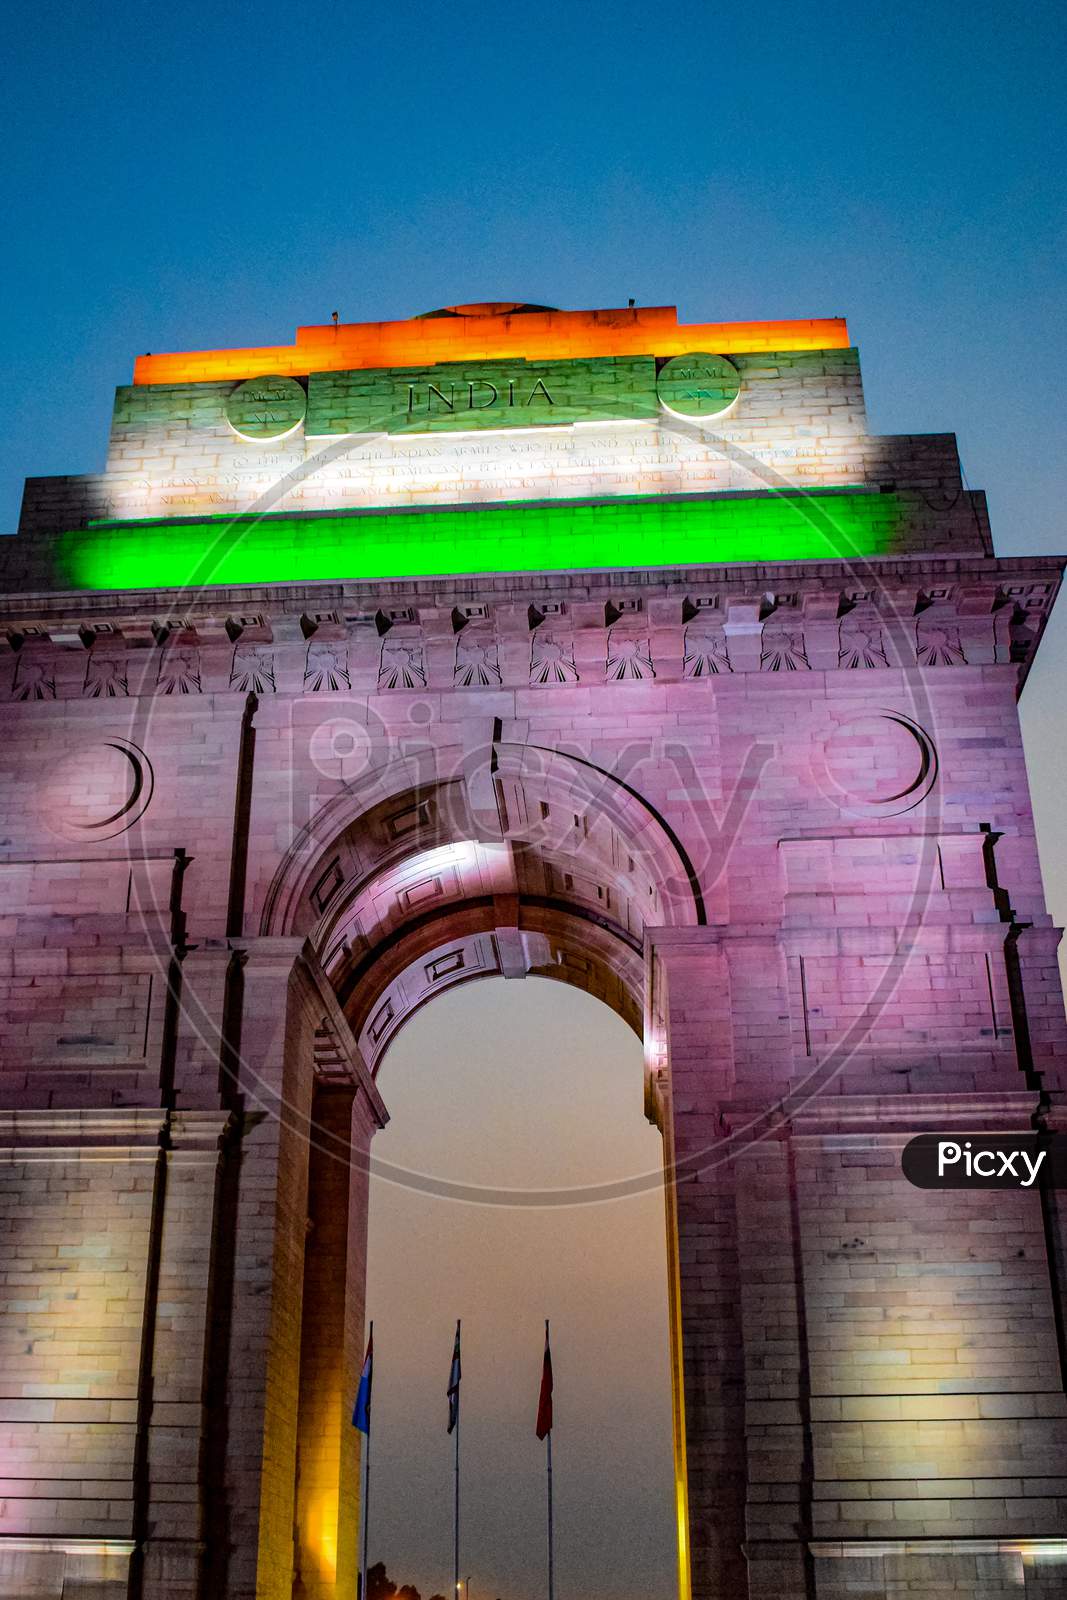 Evening View Of India Gate In Delhi India, India Gate View With Tri Colour At The Top, India Gate Architecture Full View During Evening Time